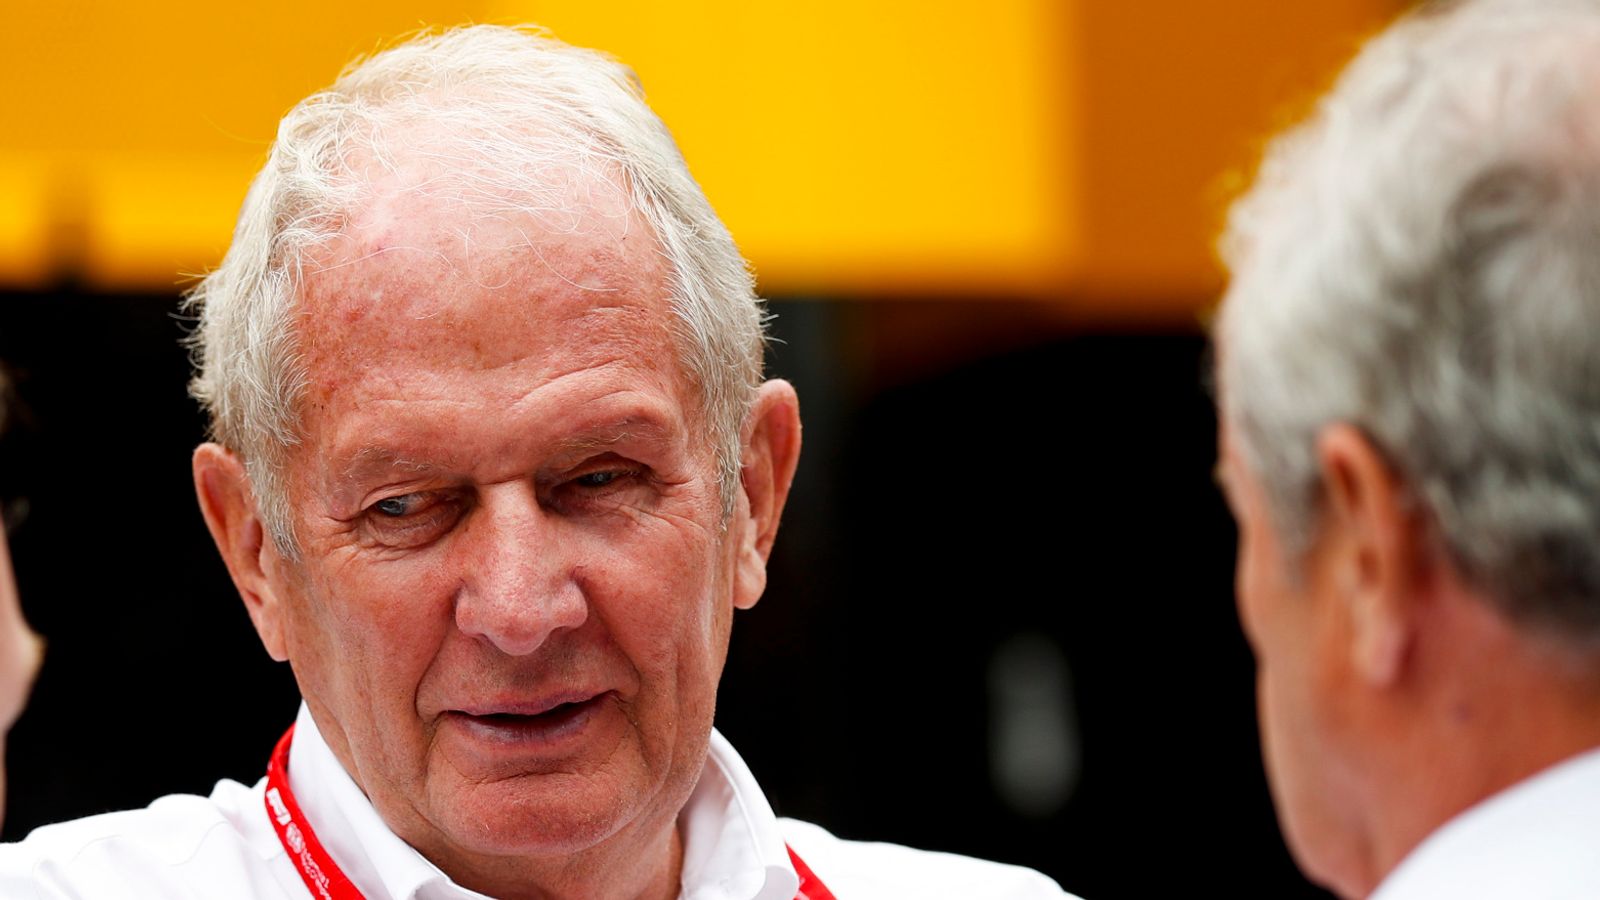 Red Bull's Marko apologises for offensive Perez remark